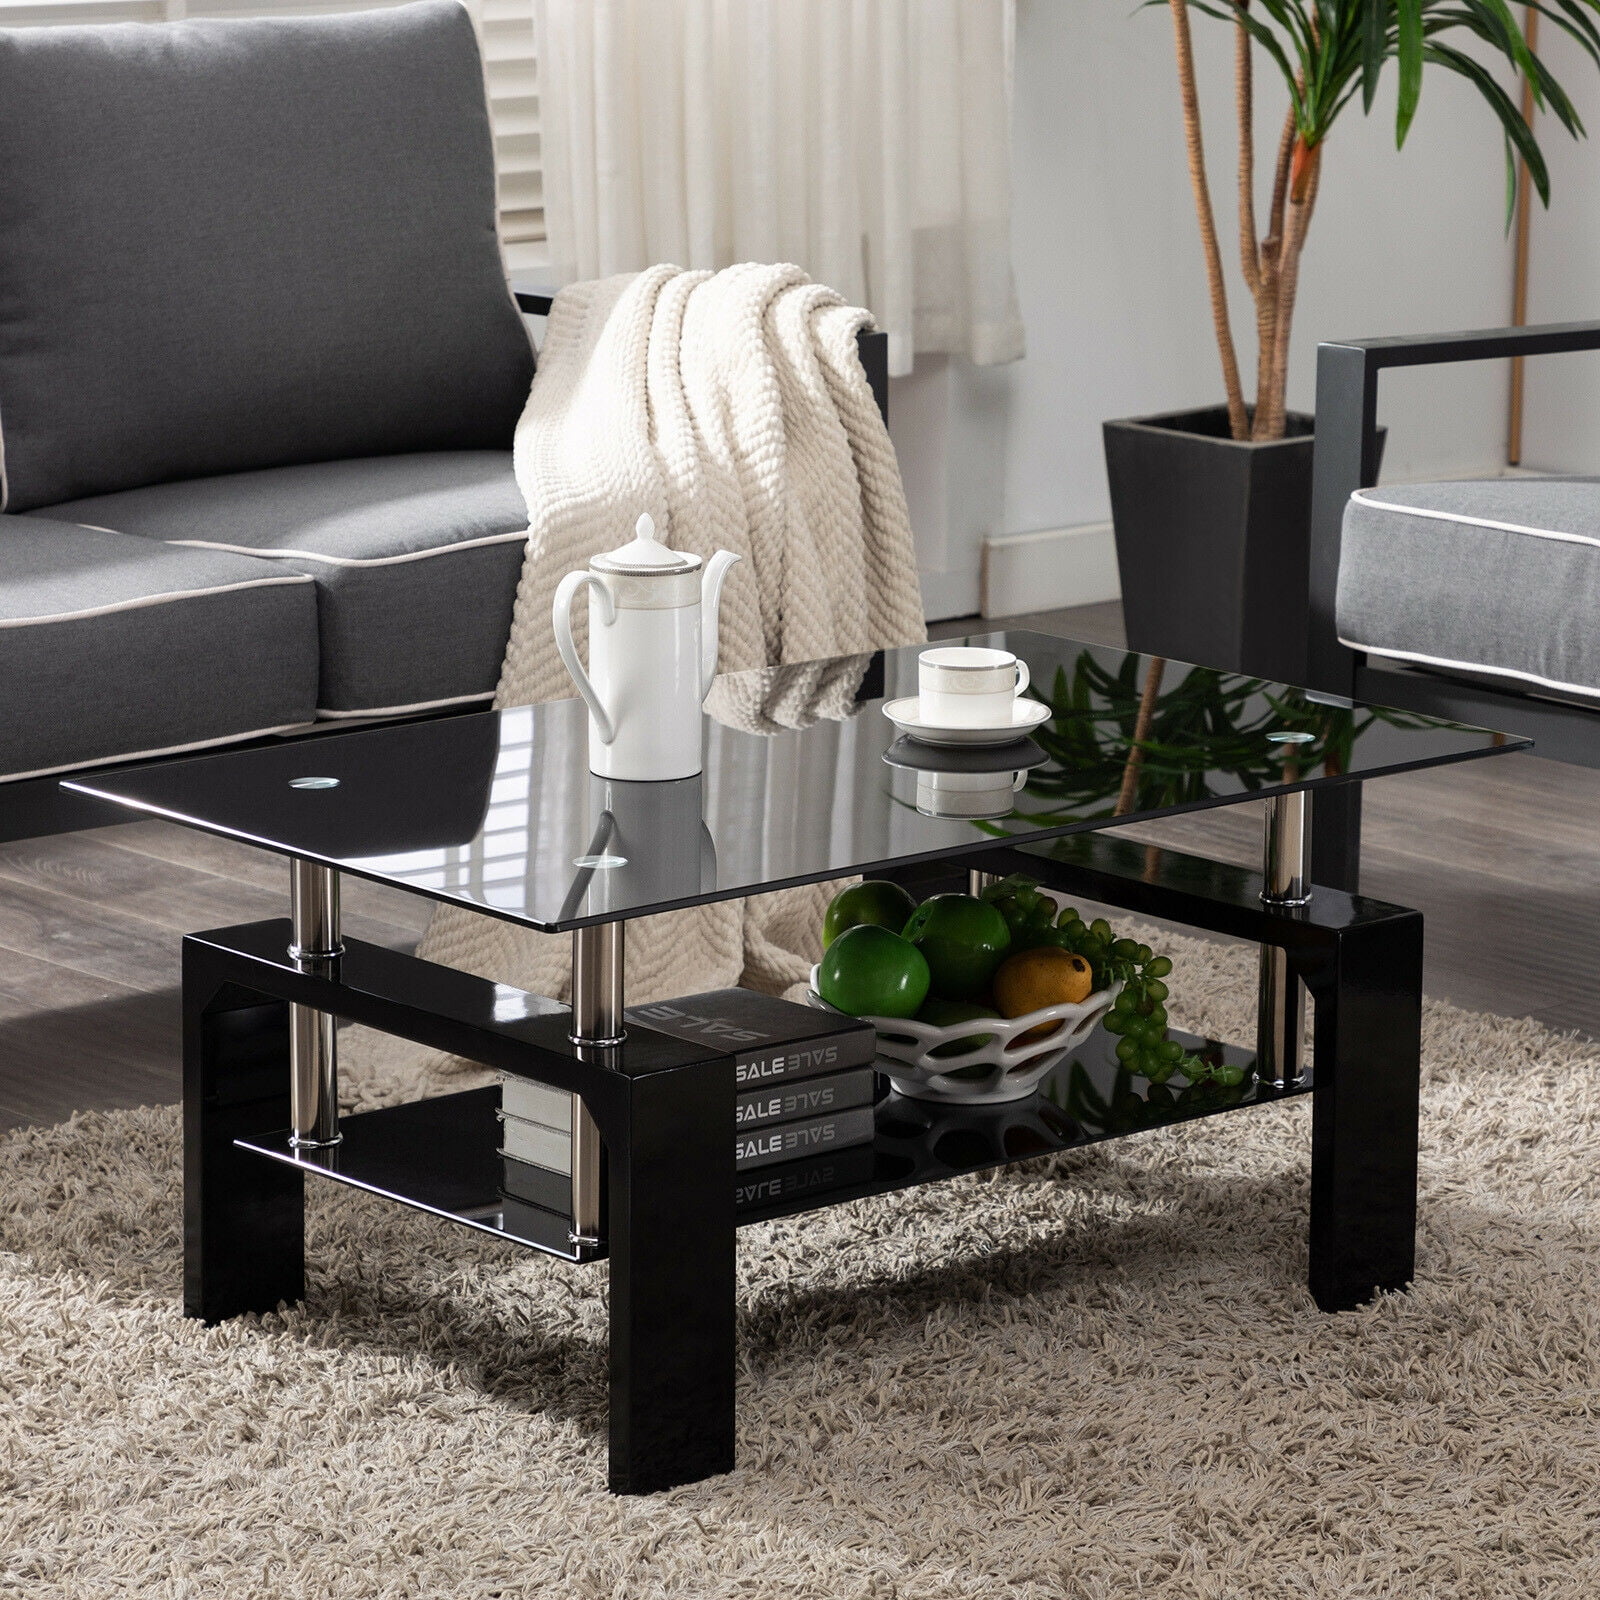 Black Tempered Glass Coffee Table Rectangle Side End Table Living Room Furniture